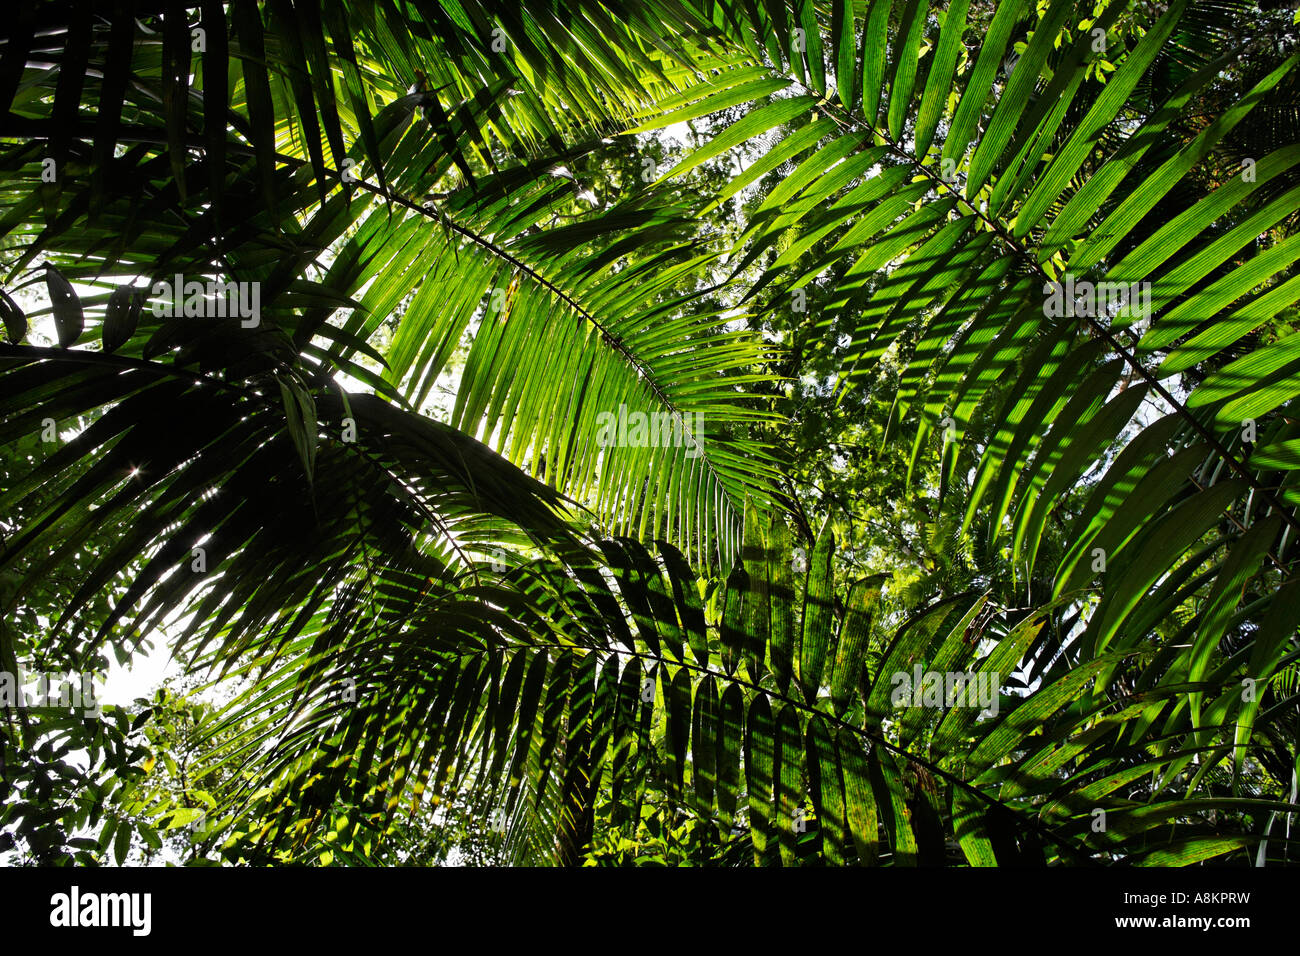 Leaves of a palms in rainforest, Costa Rica Stock Photo